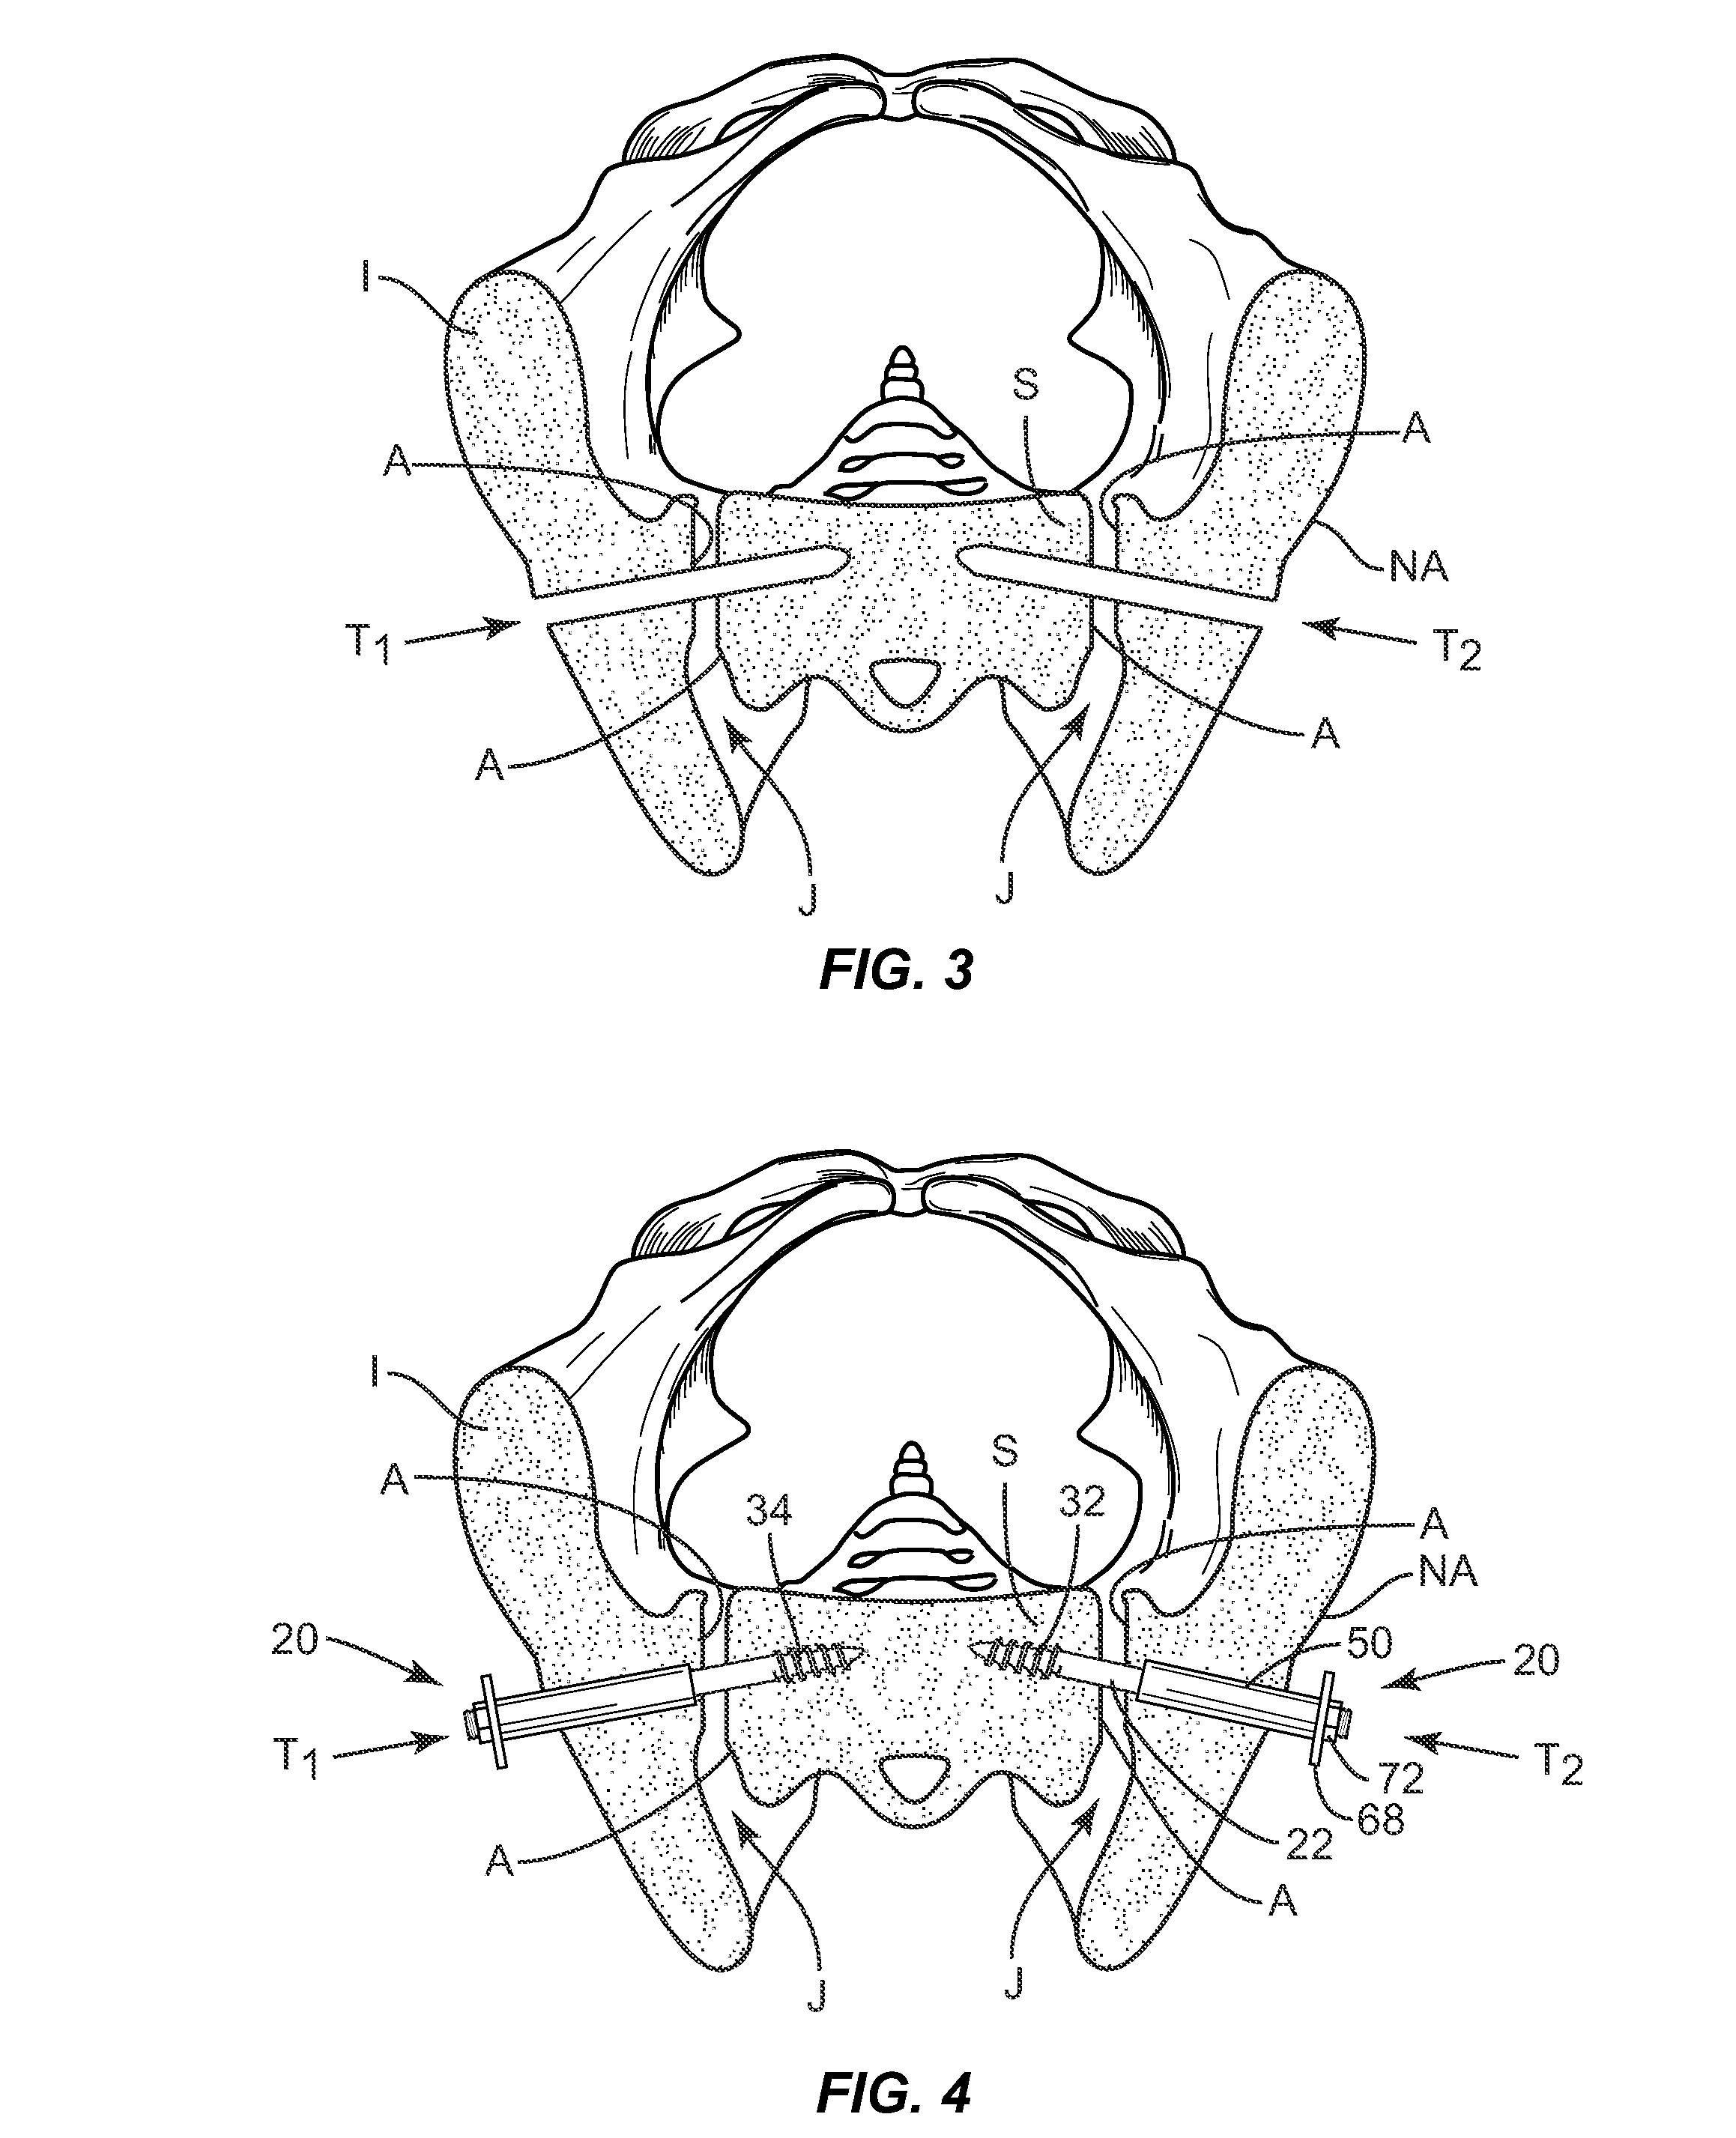 Implant system and method for stabilization of a sacro-iliac joint